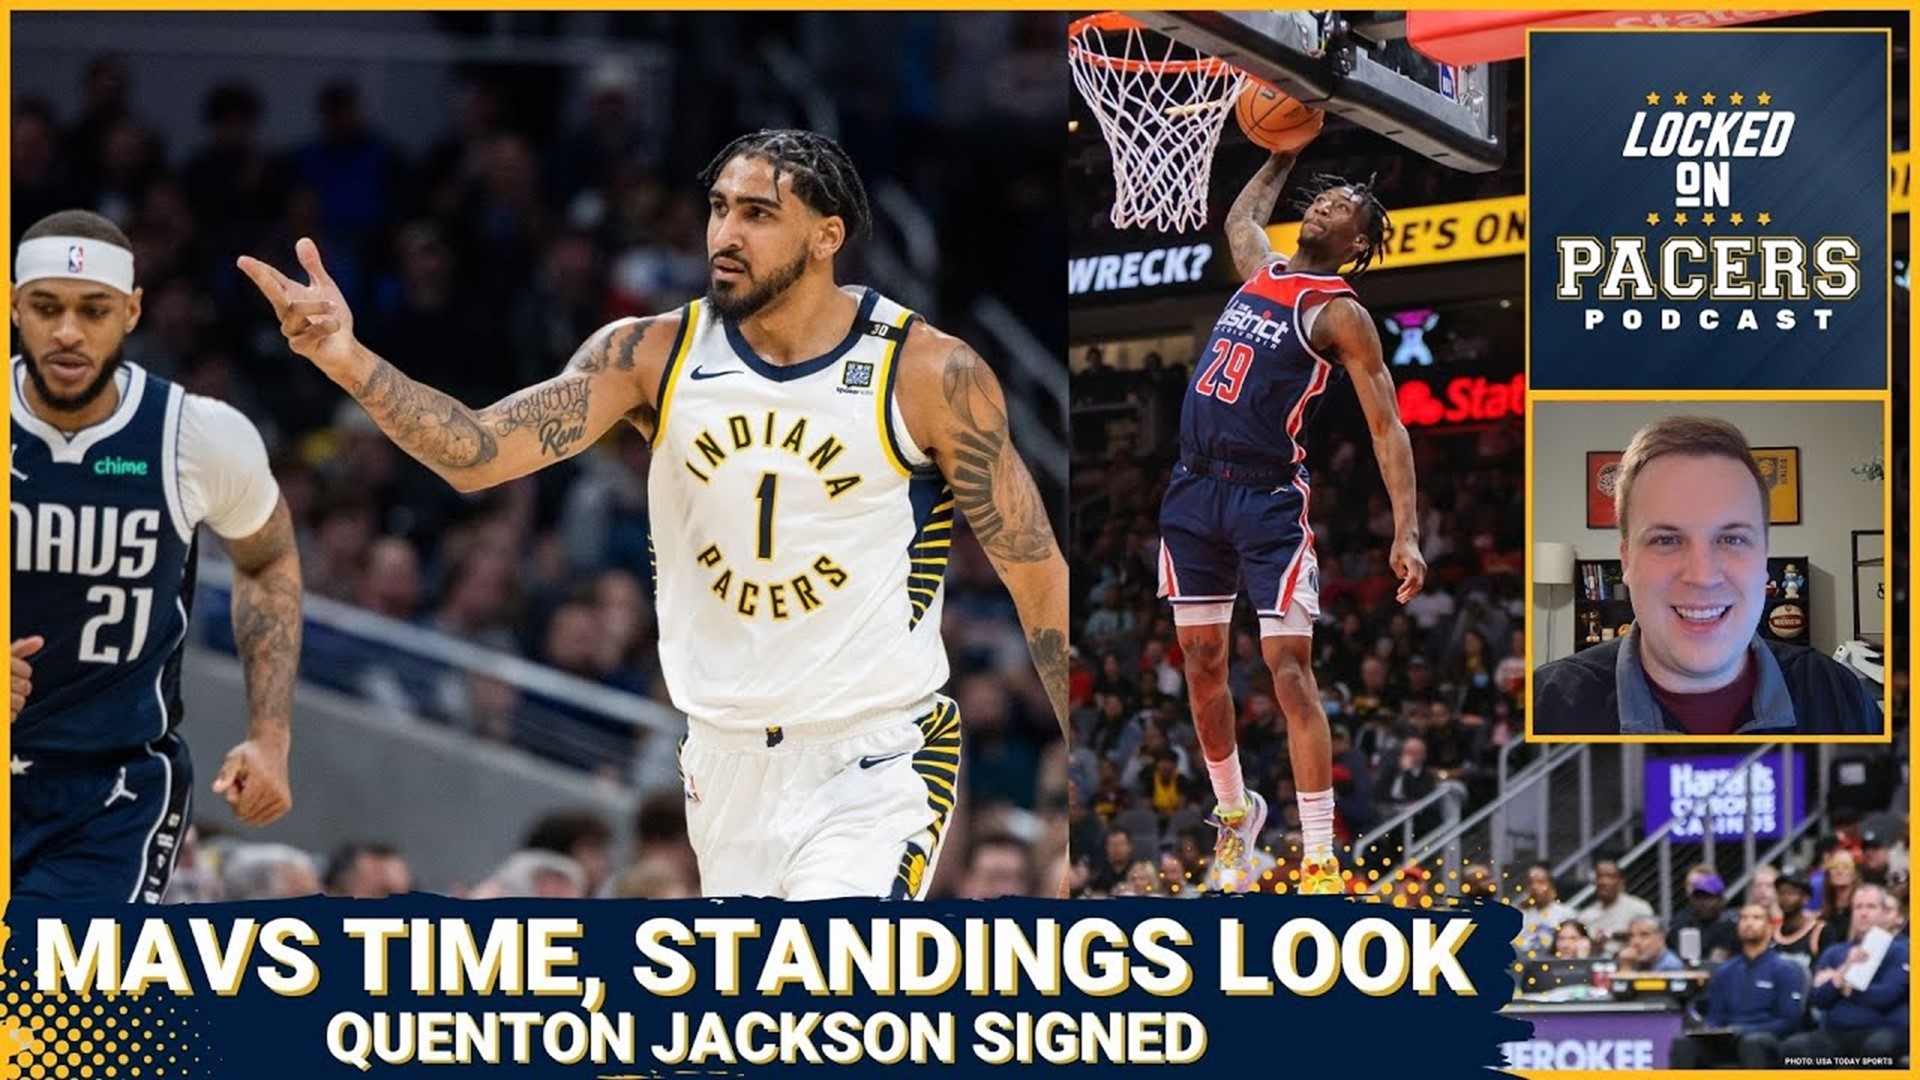 Can the Indiana Pacers catch anyone in the standings? Pacers sign Quenton Jackson, Mavs preview